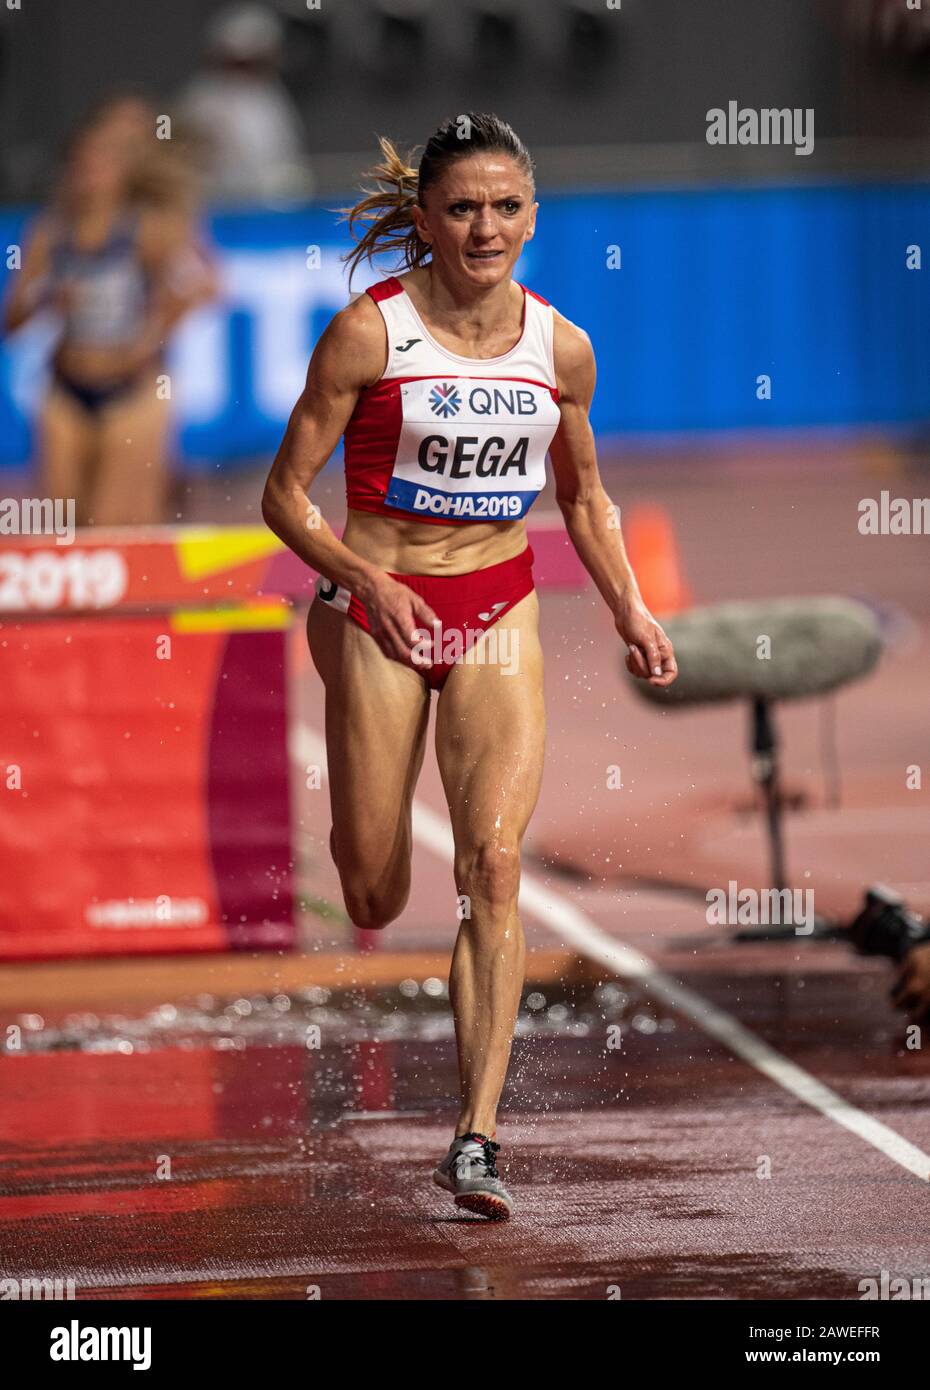 DOHA - QATAR - SEP 27: Luiza Gega (ALB) competing in the women’s 3000m steeplechase heats during day one of 17th IAAF World Athletics Championships Do Stock Photo